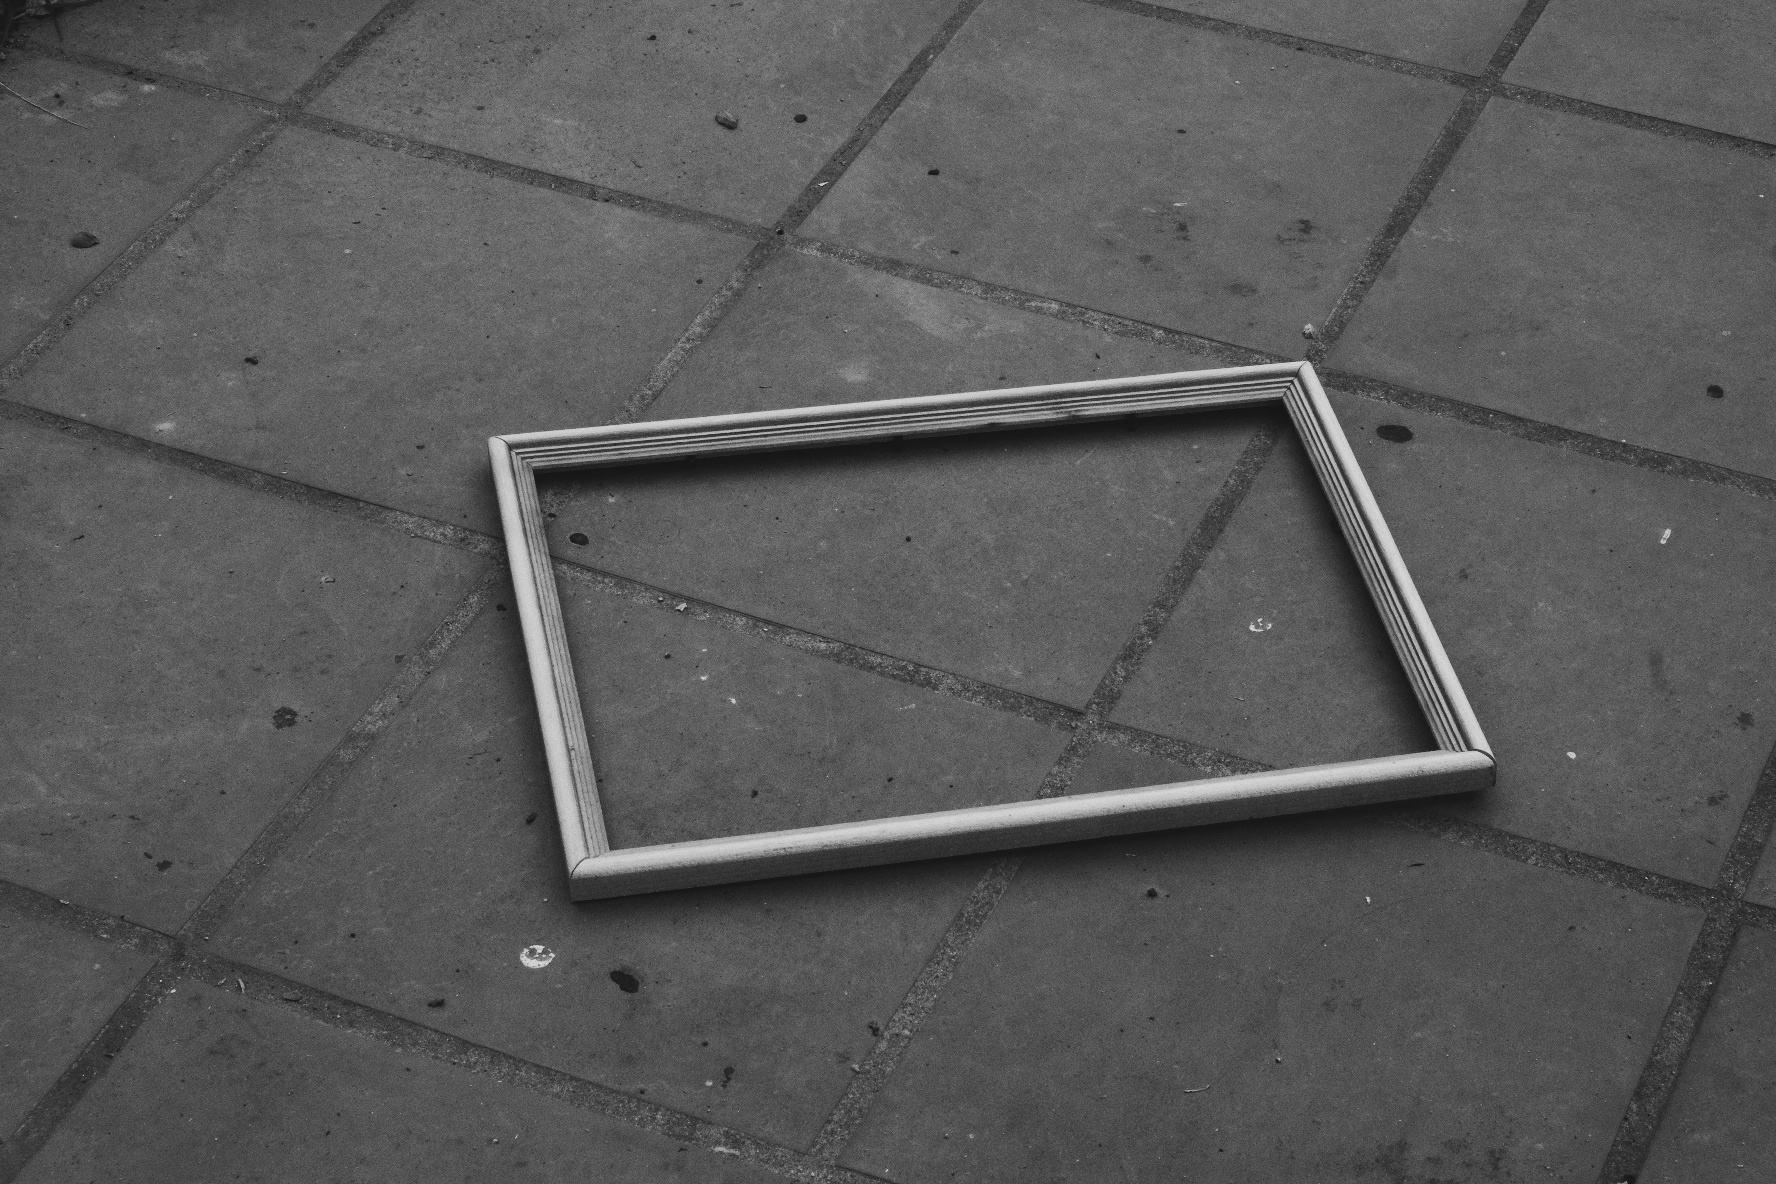 B/w Photo of an empty frame on the floor. Piles below. A bit of dust. And the frame had a slight and strange glow to it